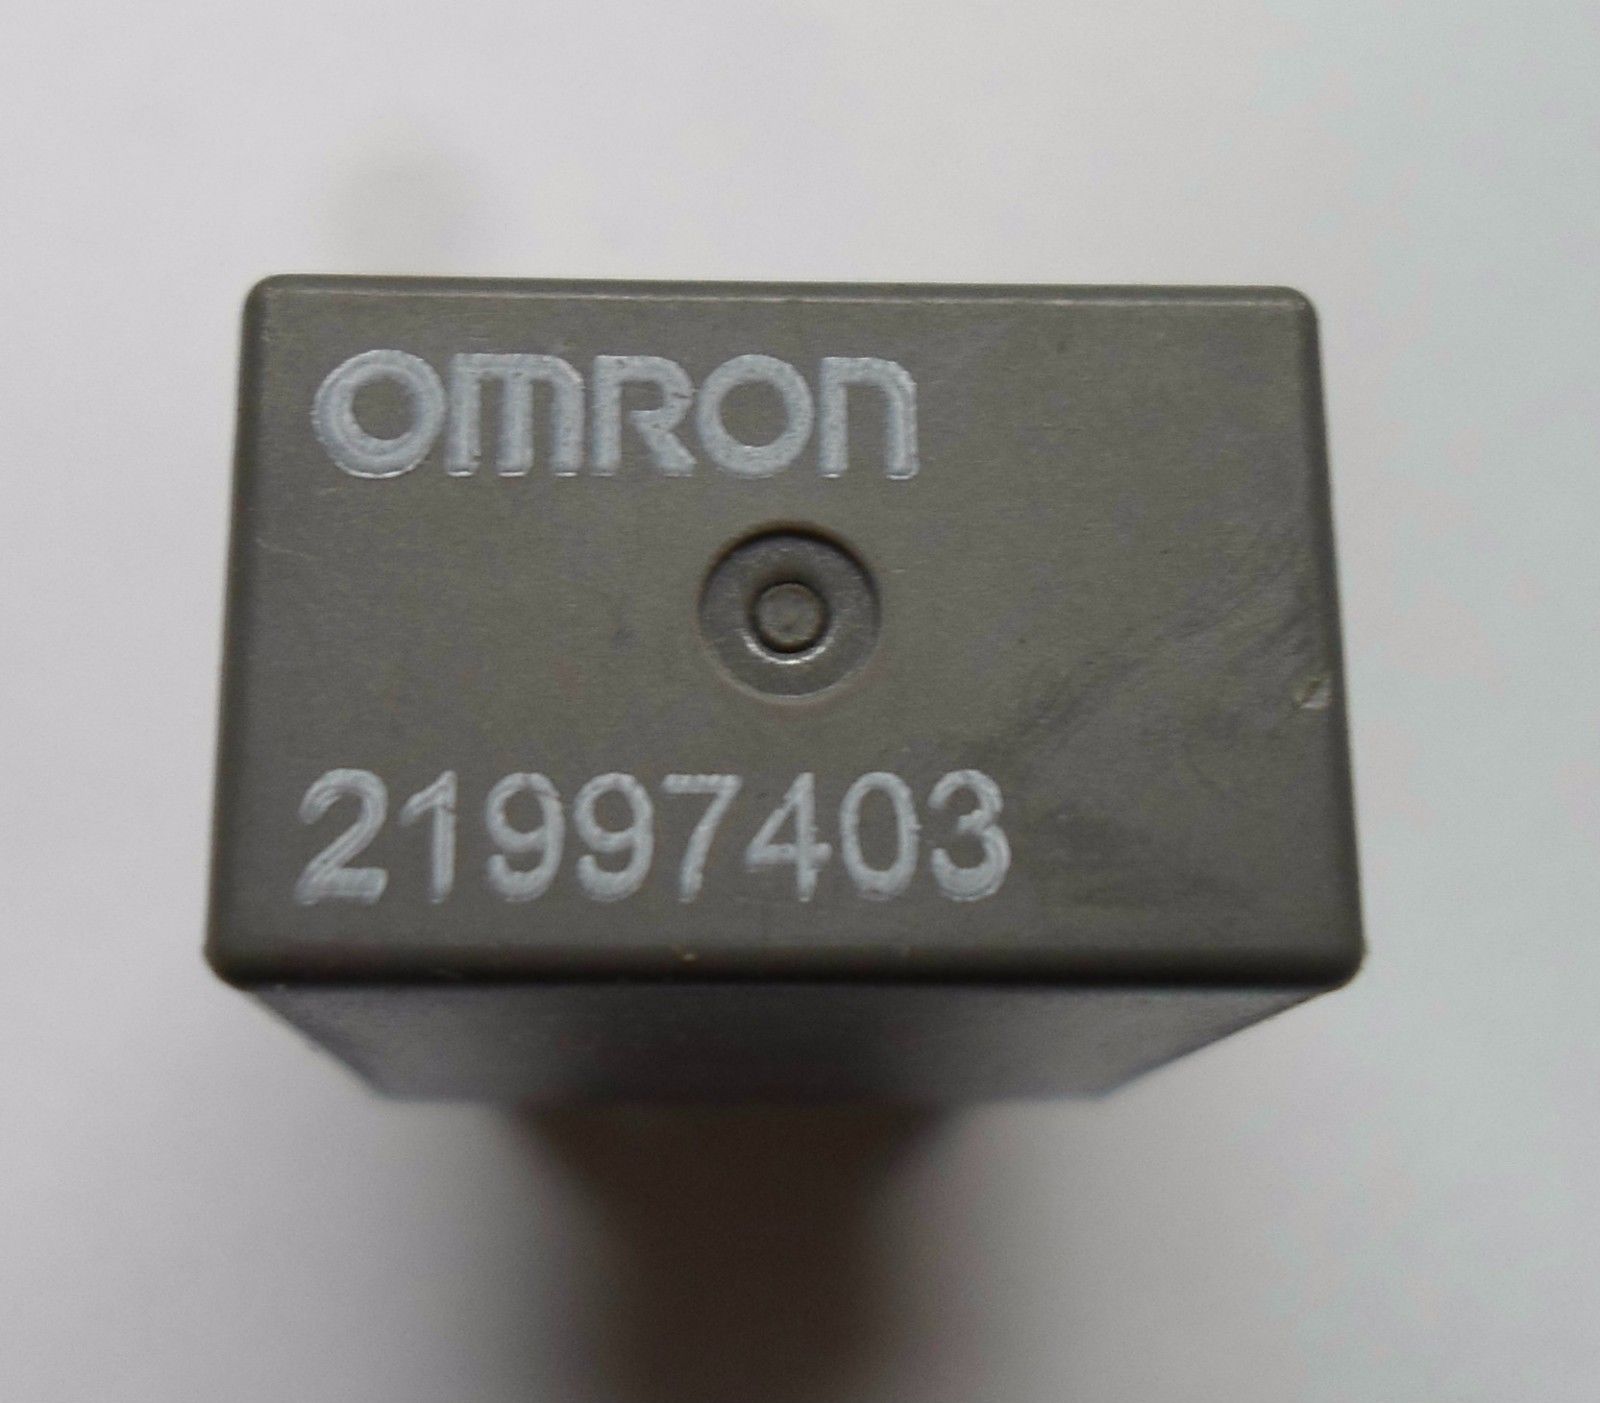 GM OMRON  RELAY 21997403   TESTED 6 MONTH WARRANTY  FREE SHIPPING!  GM3